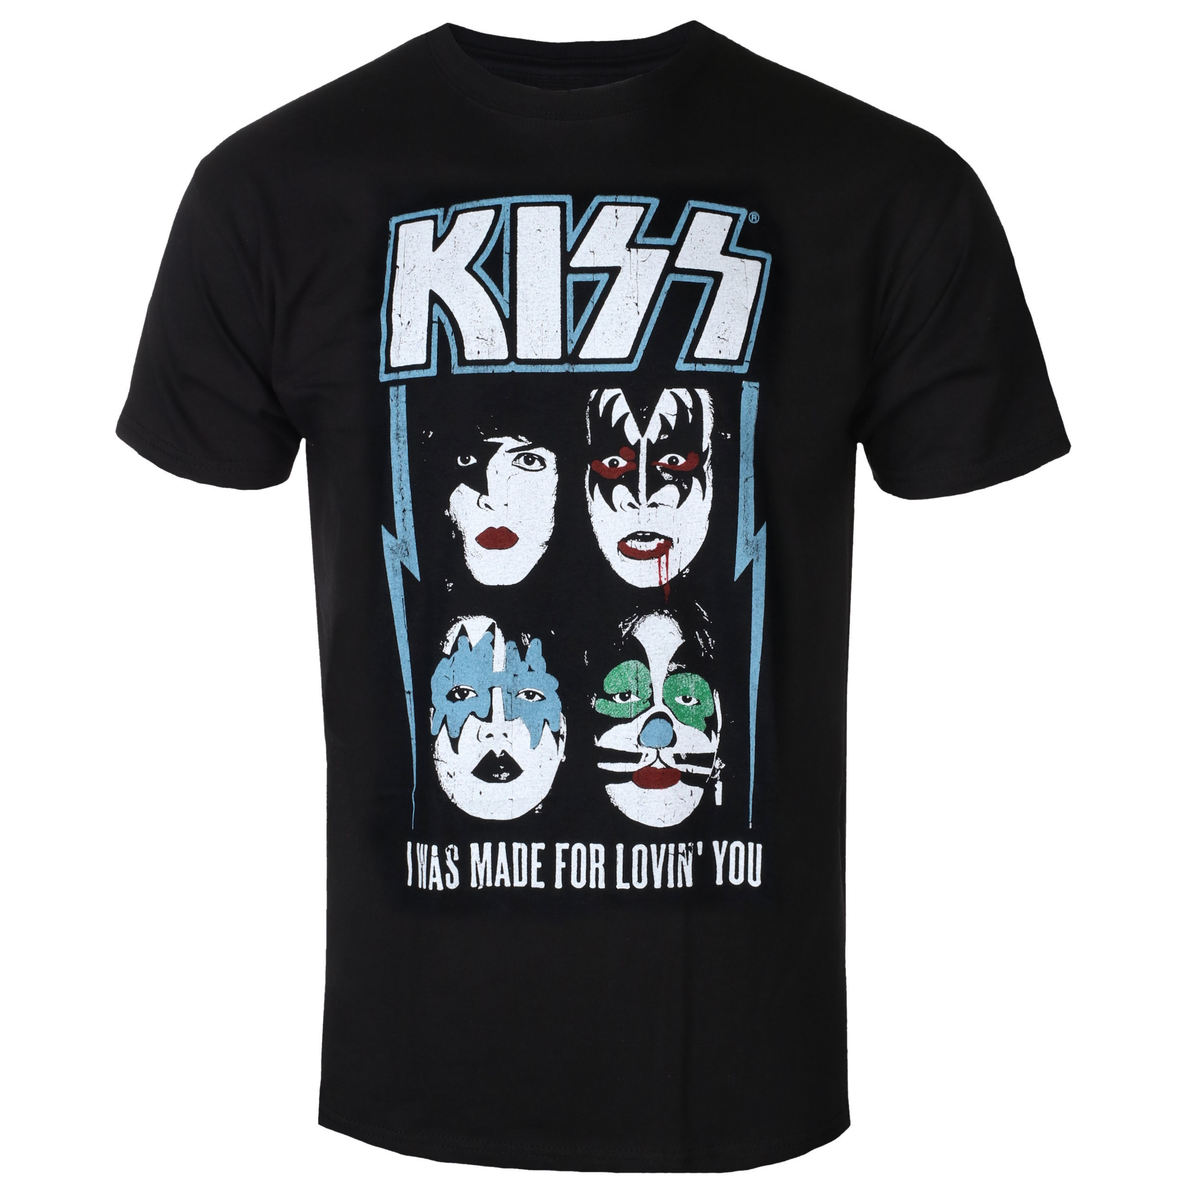 KISS - Made For Lovin' You (Large)